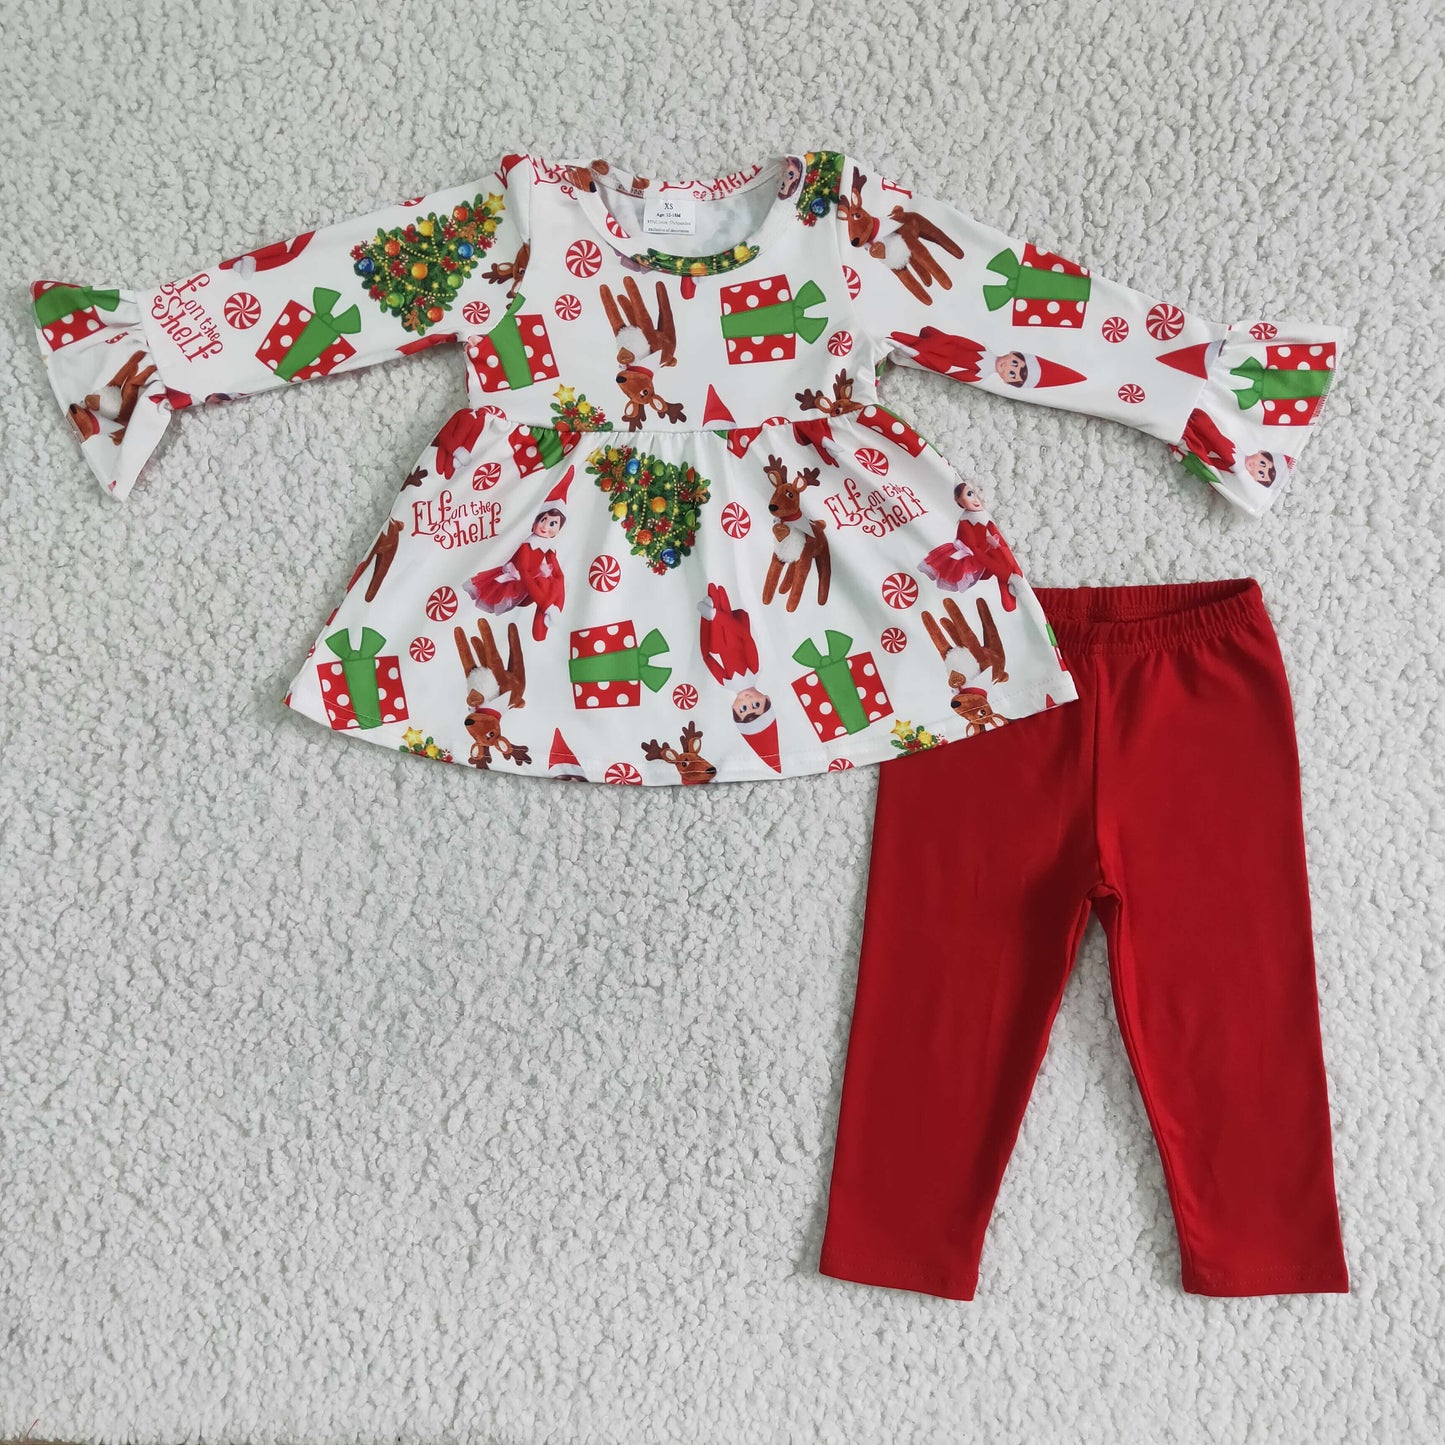 RTS Christmas tree red cartoon little man gift  long sleeve legging pant outfit 0520